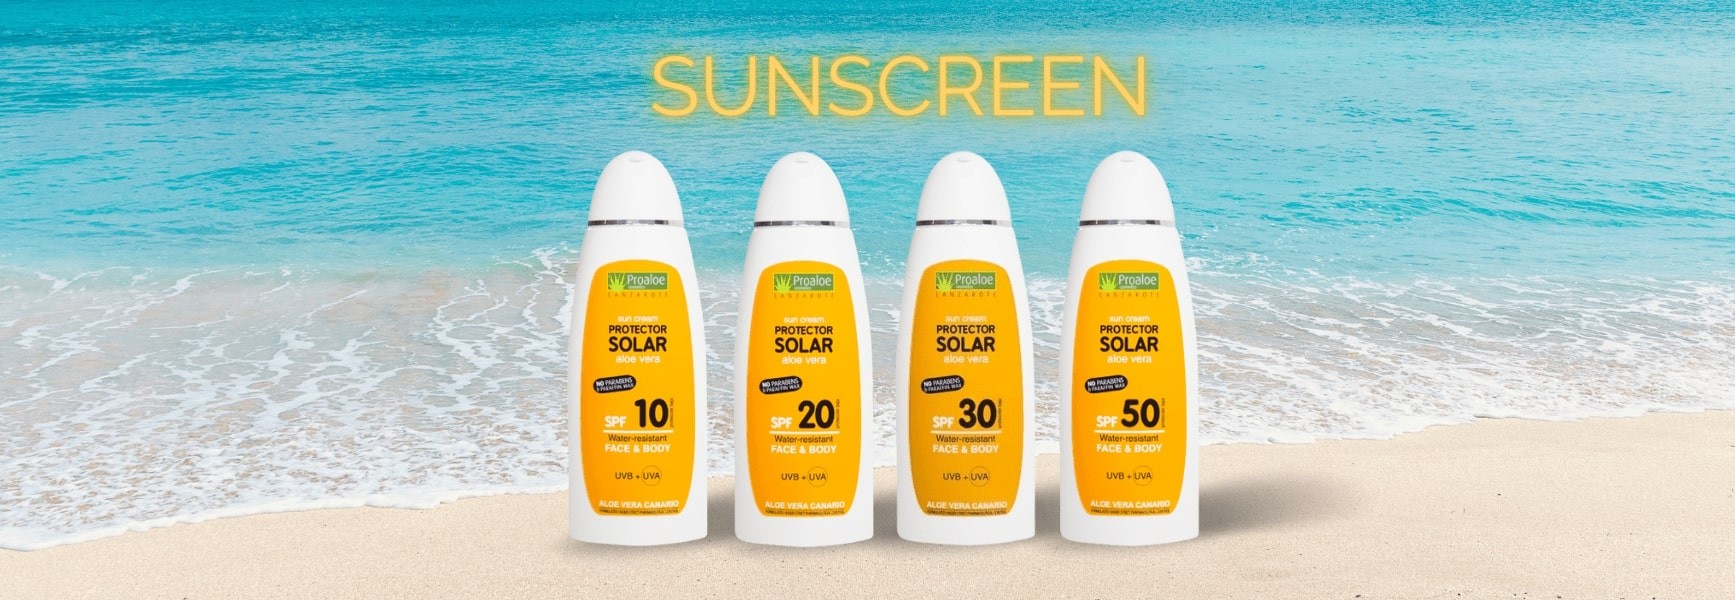 Aloe Vera Sunscreen with different sun protection factors (SPF) and sizes